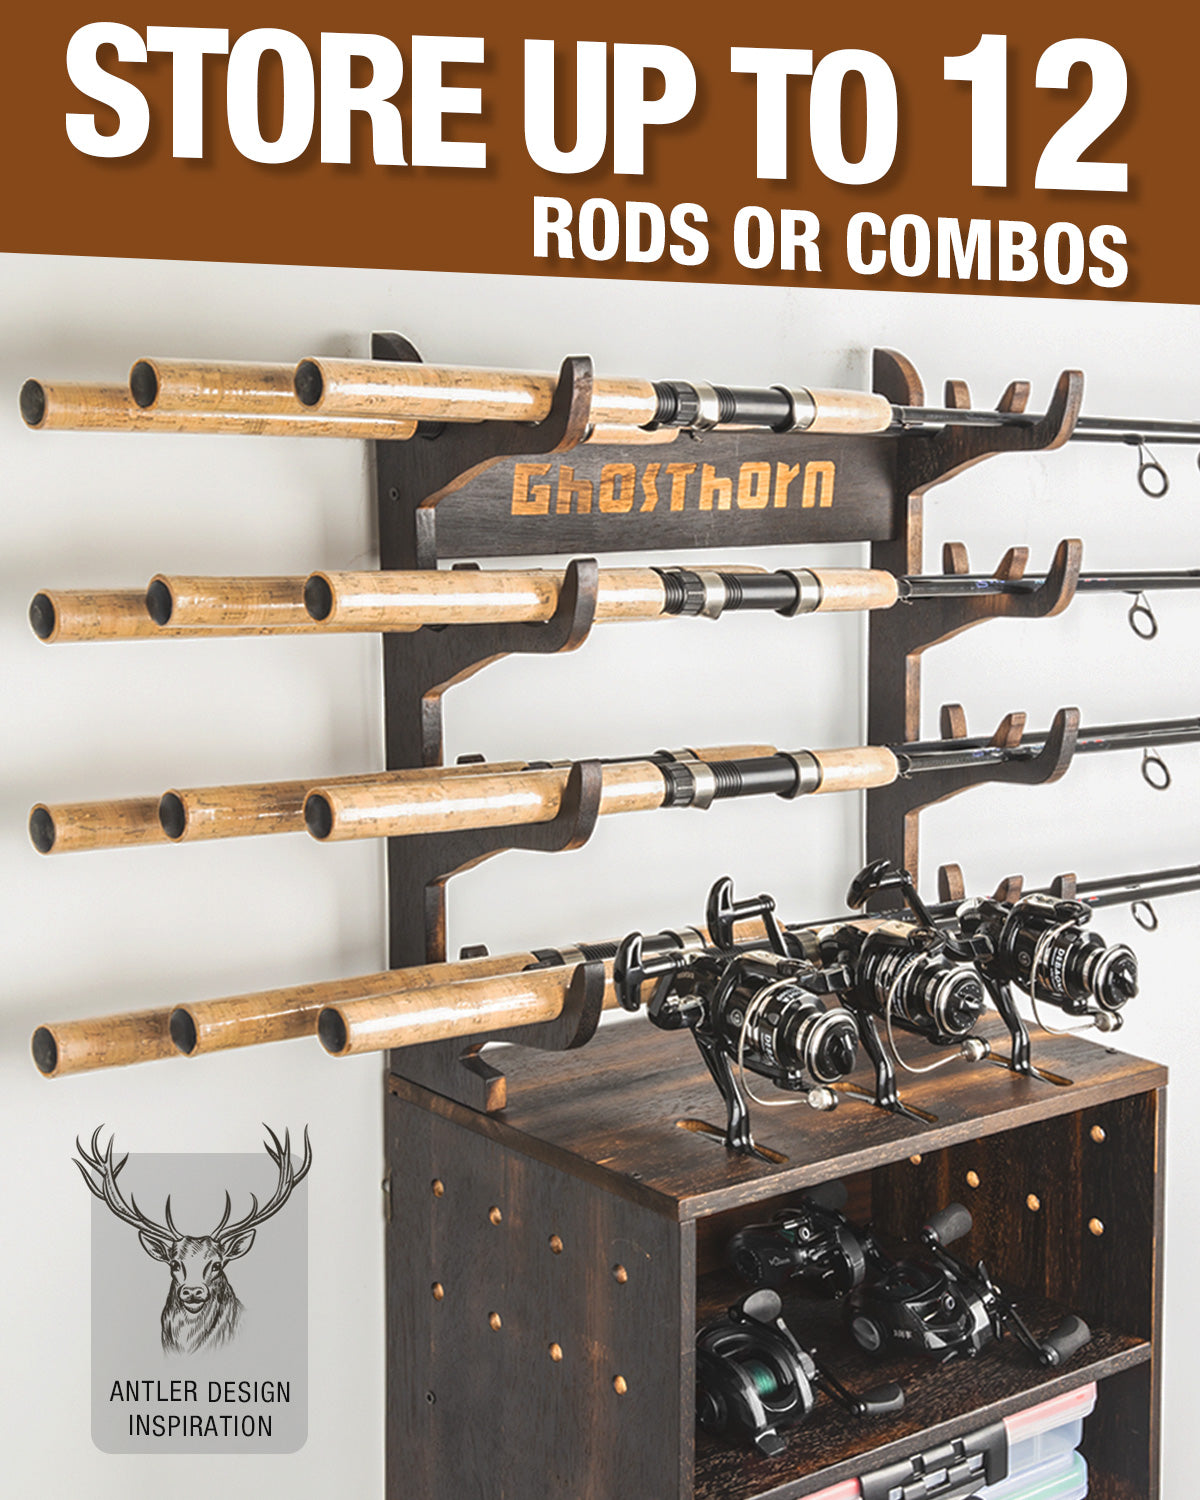 Fishing Pole Rod Racks Holds Up to 12 Rods Hard Wood Wall Mounted Pole Rod Holders Reel Box - Ghosthorn